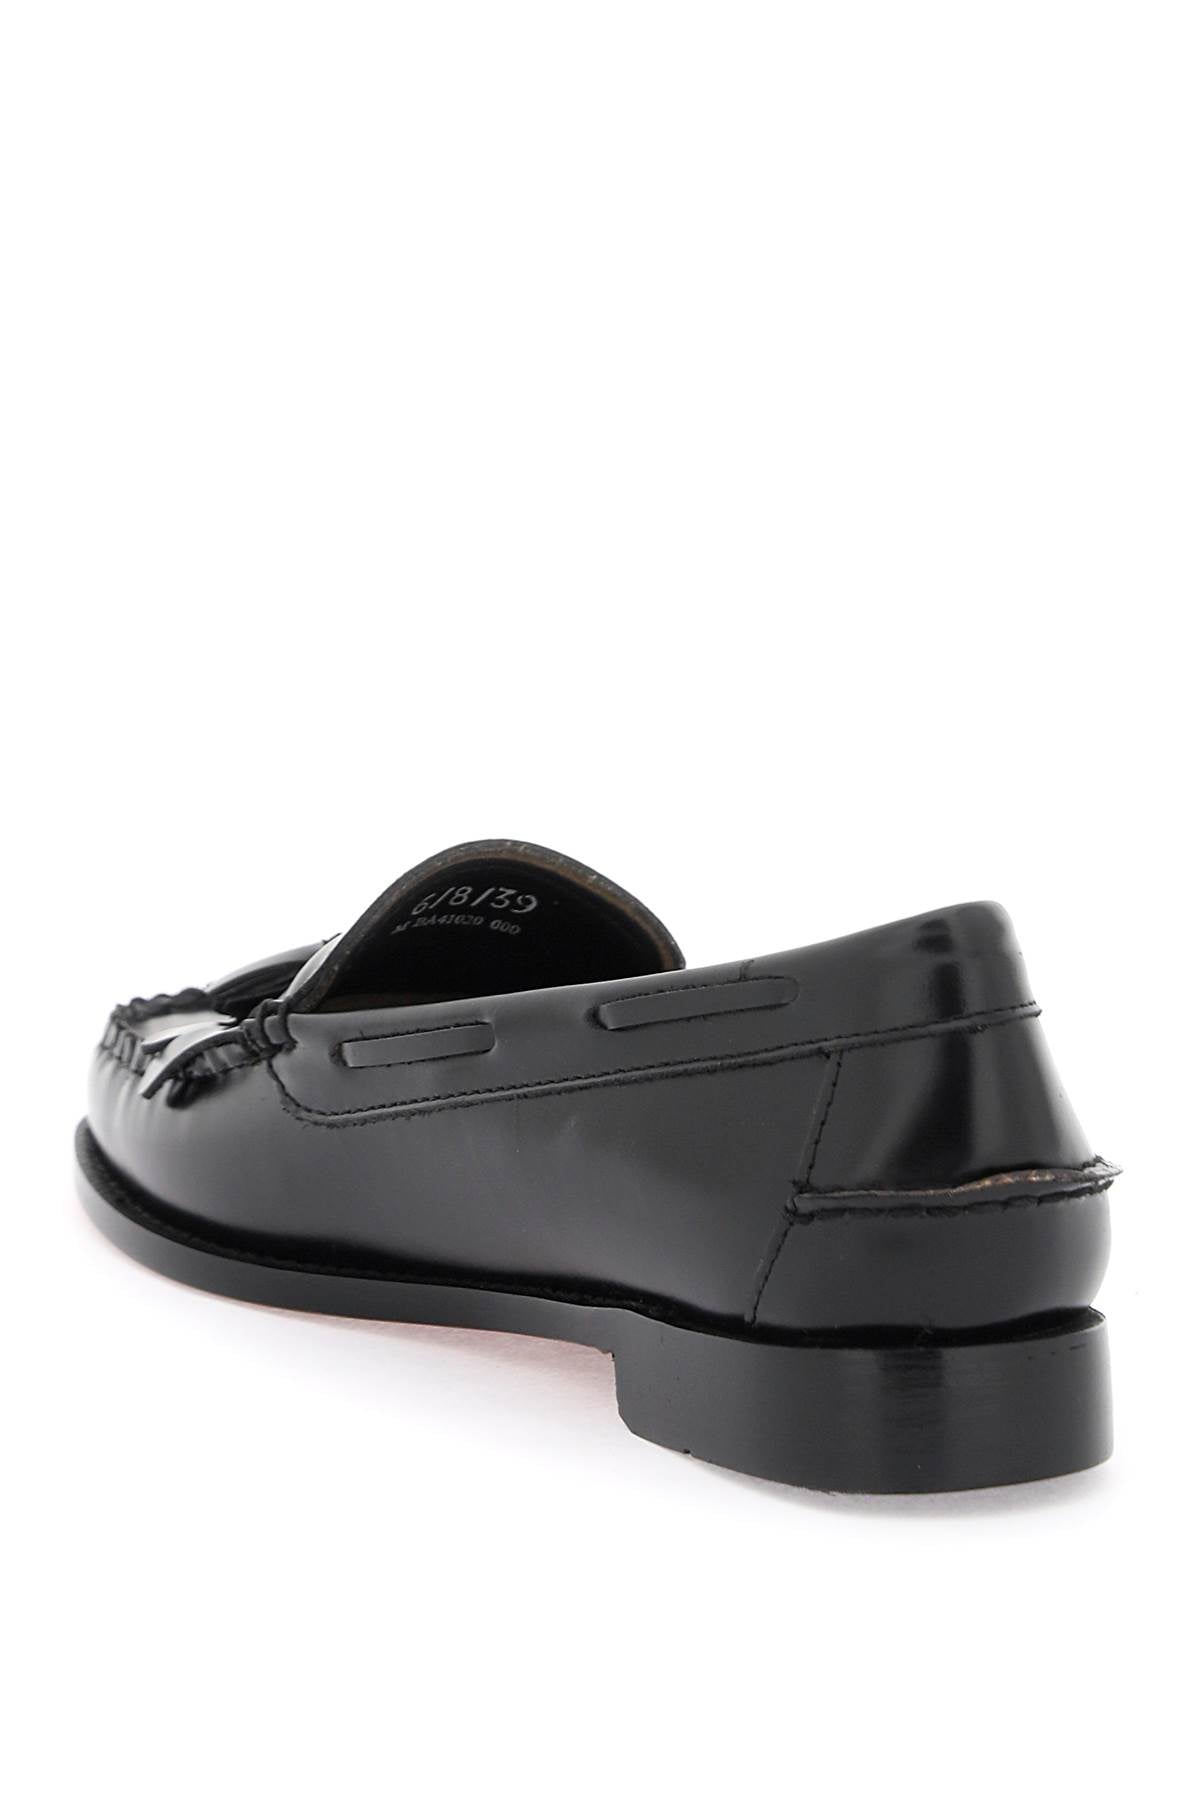 G.h. bass esther kiltie weejuns loafers in brushed leather-2